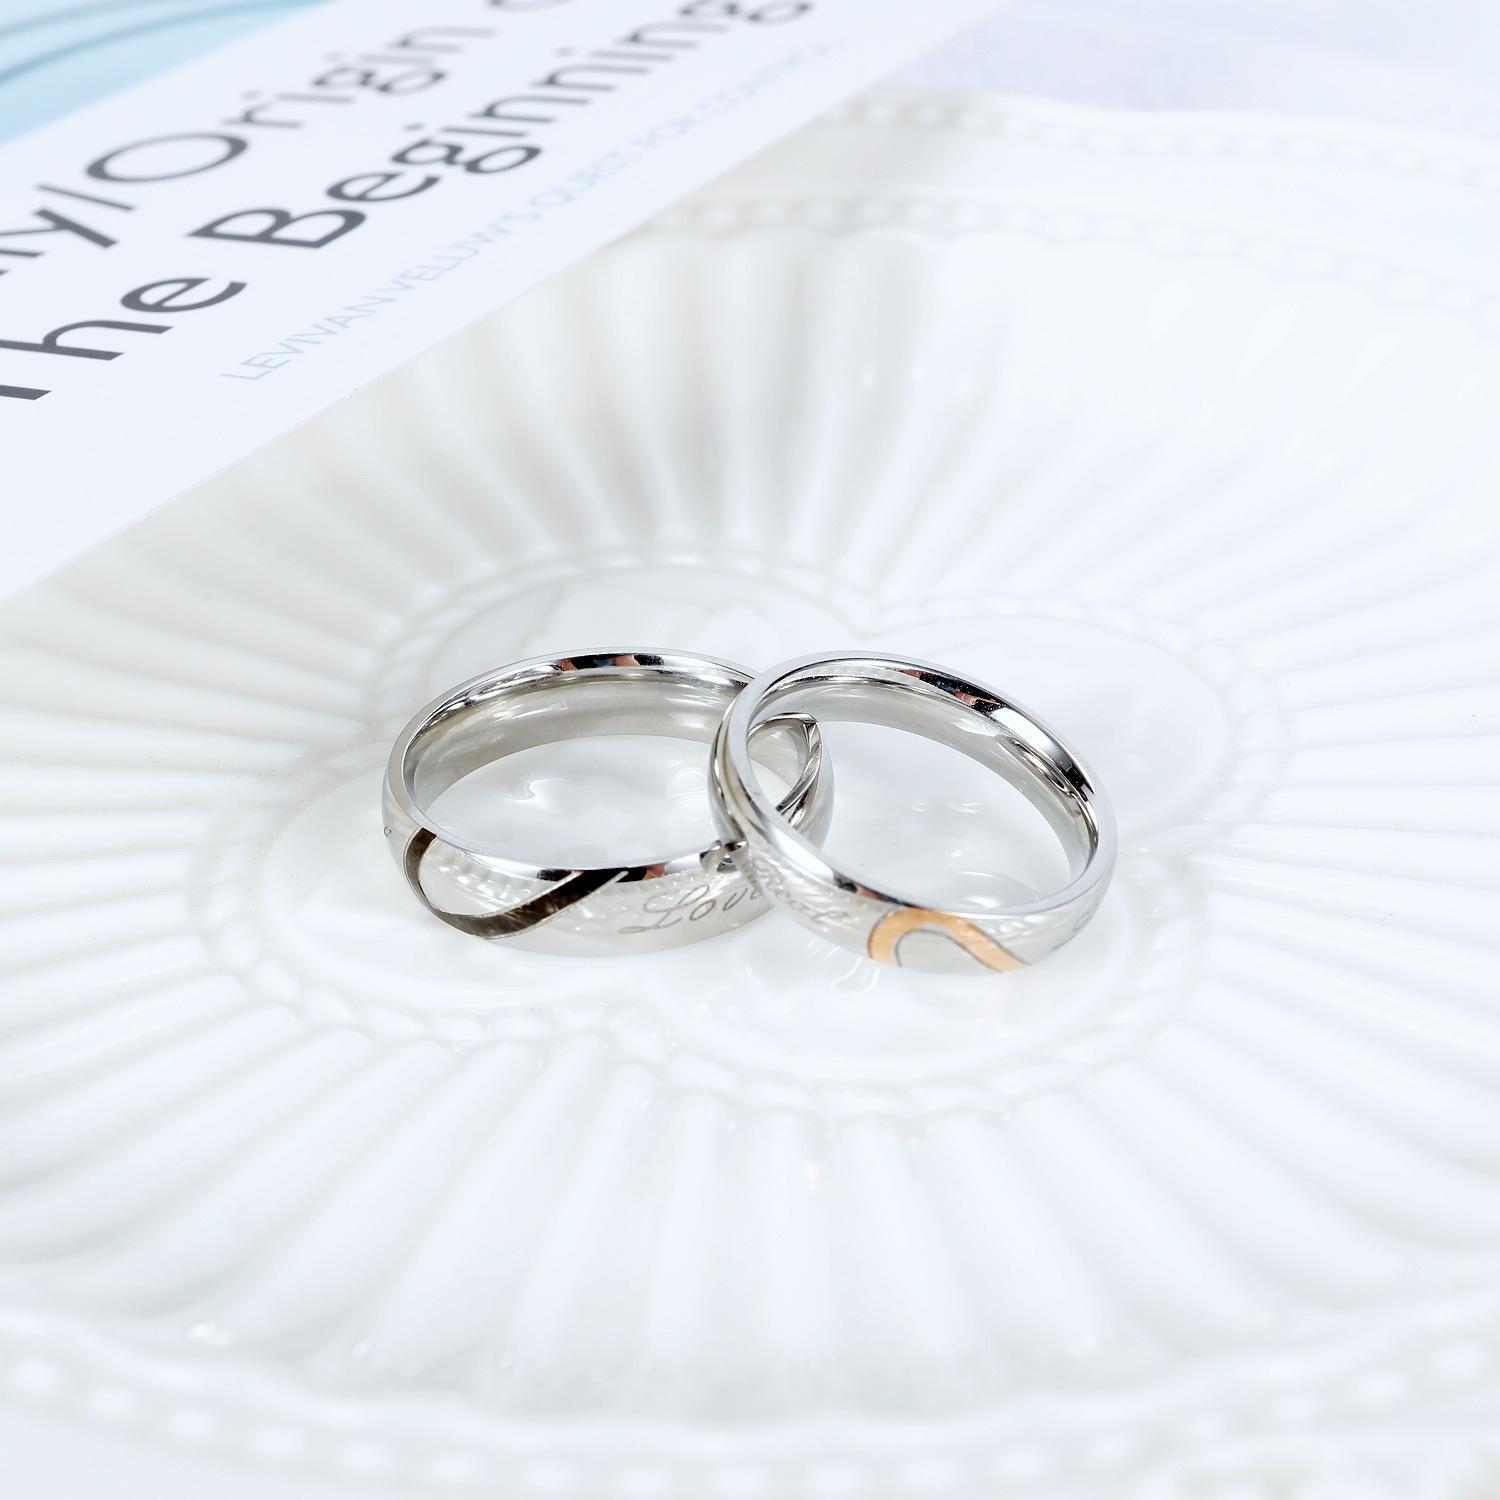 Engravable Matching Heart Couple Rings In Titanium - CoupleSets